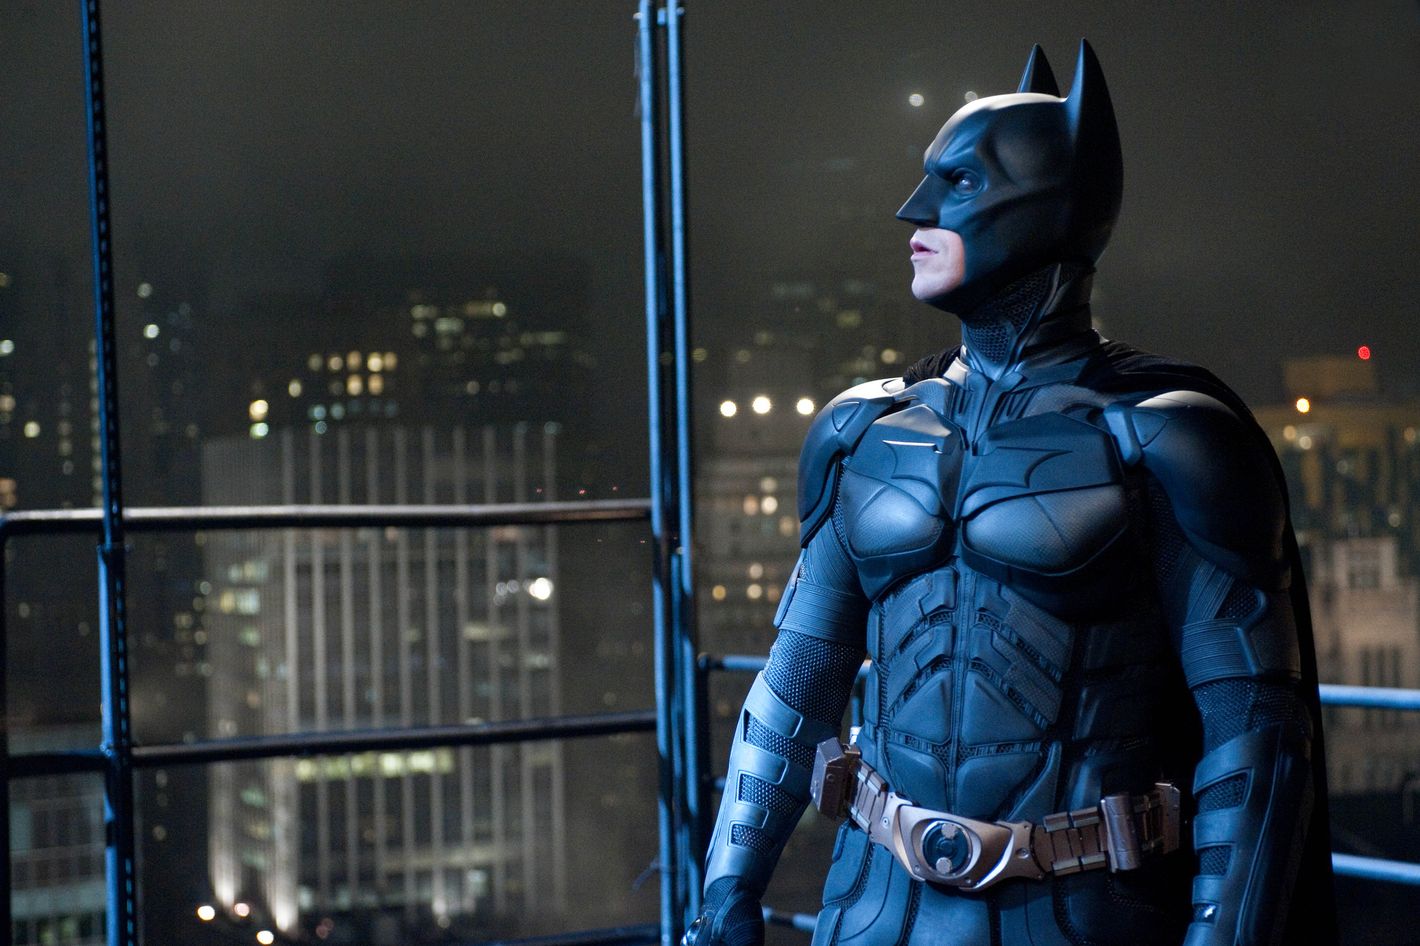 Edelstein The Dark Knight Rises Closes Out The Most Ambitious Superhero Movie Cycle Ever